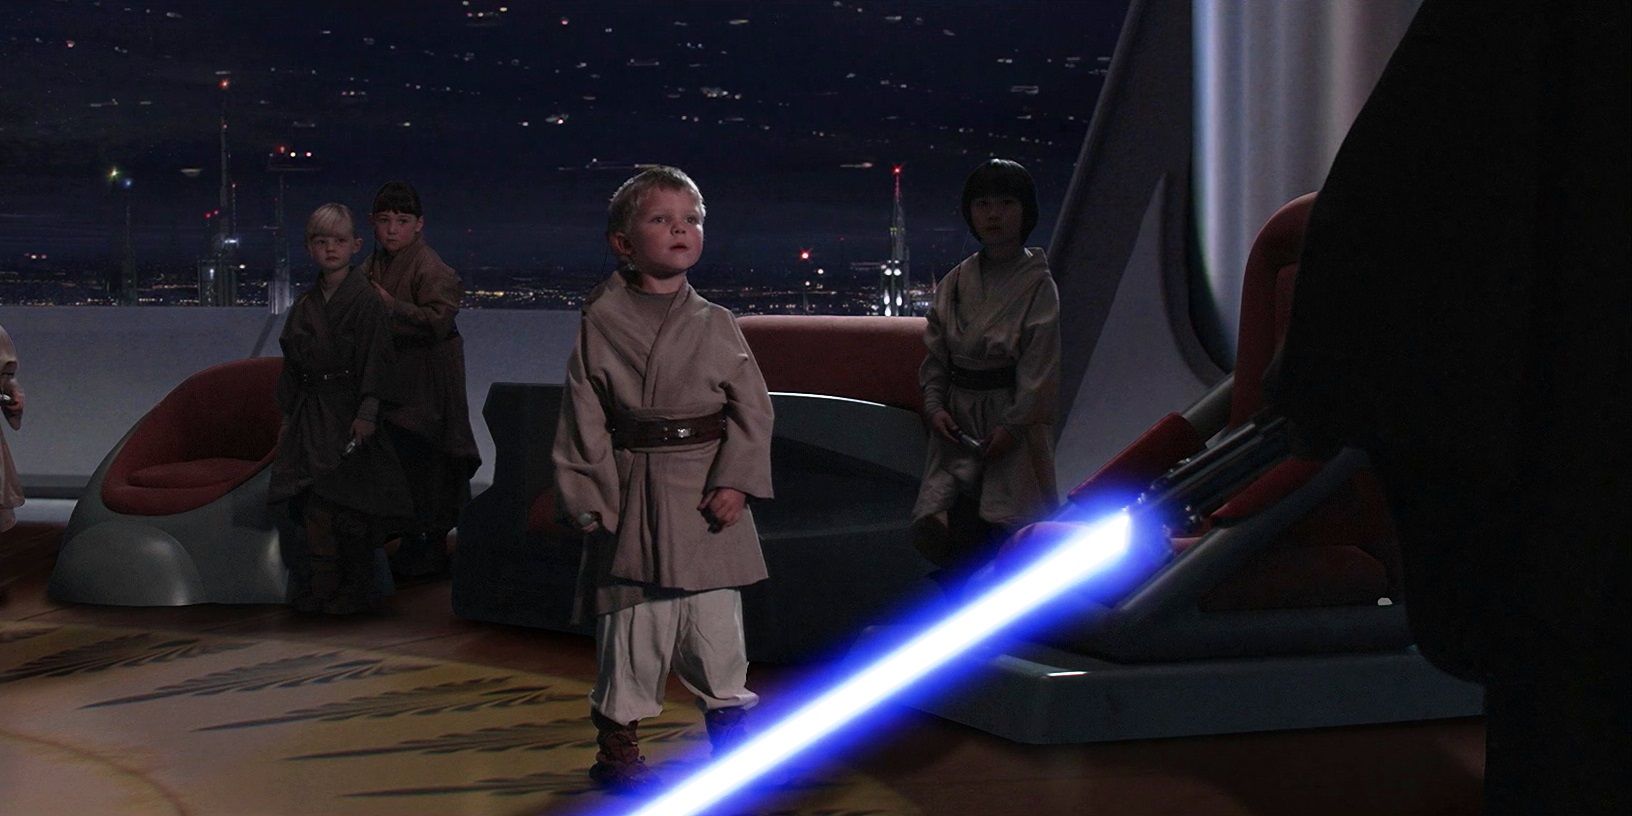 Anakin Skywalker prepares to kill younglings in Star Wars Revenge of the Sith